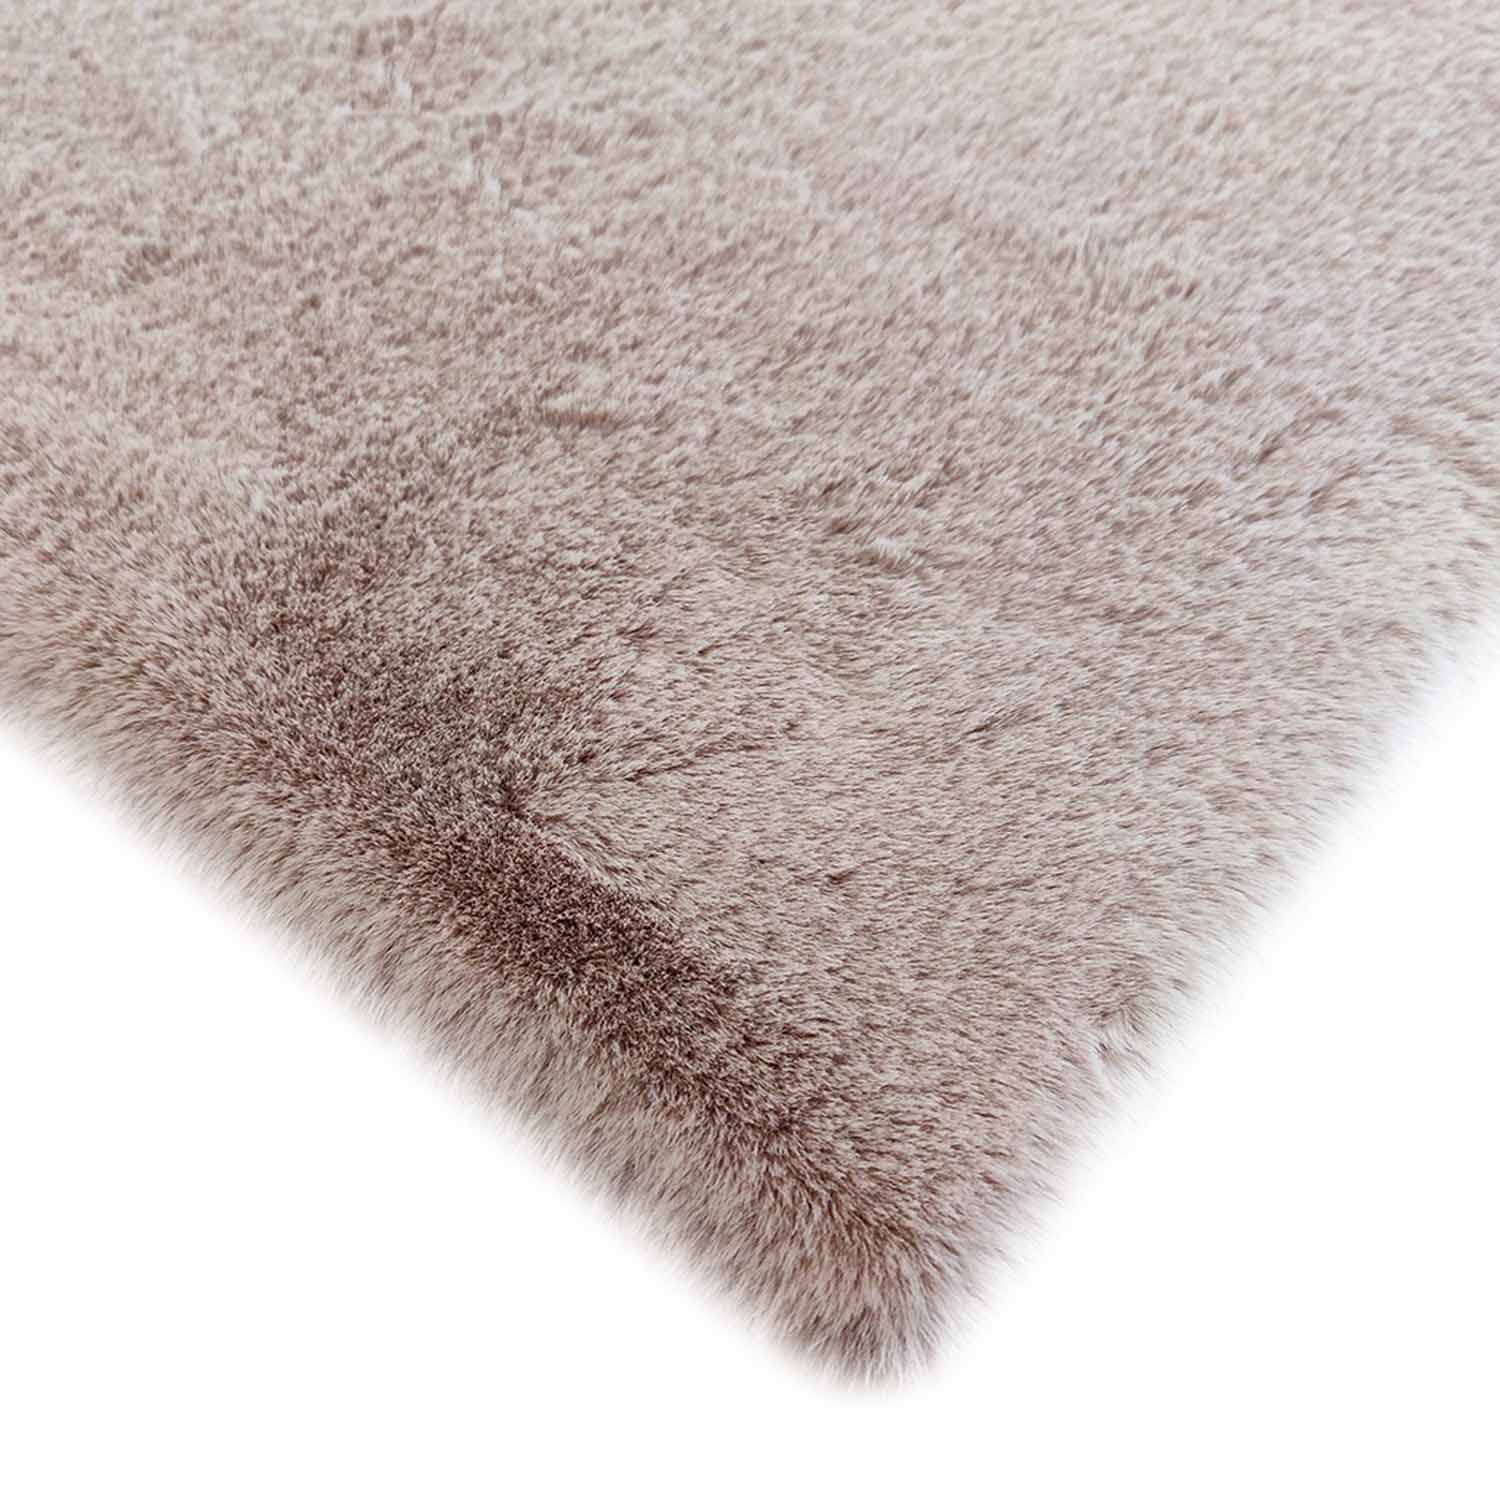 The Home Living Room Bambi Rug 80cm x 150cm - Pink 2 Shaws Department Stores